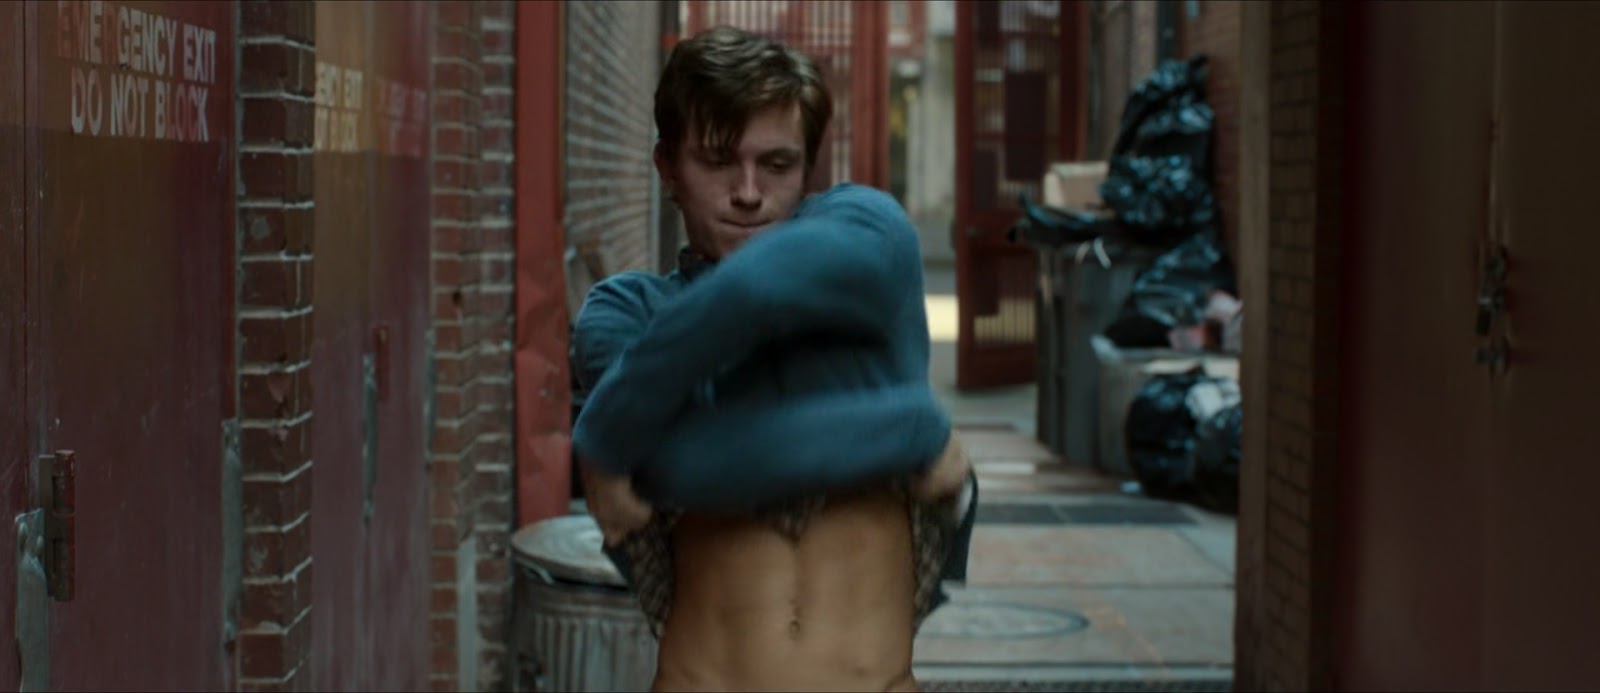 Tom Holland shirtless in Spider-Man Homecoming.